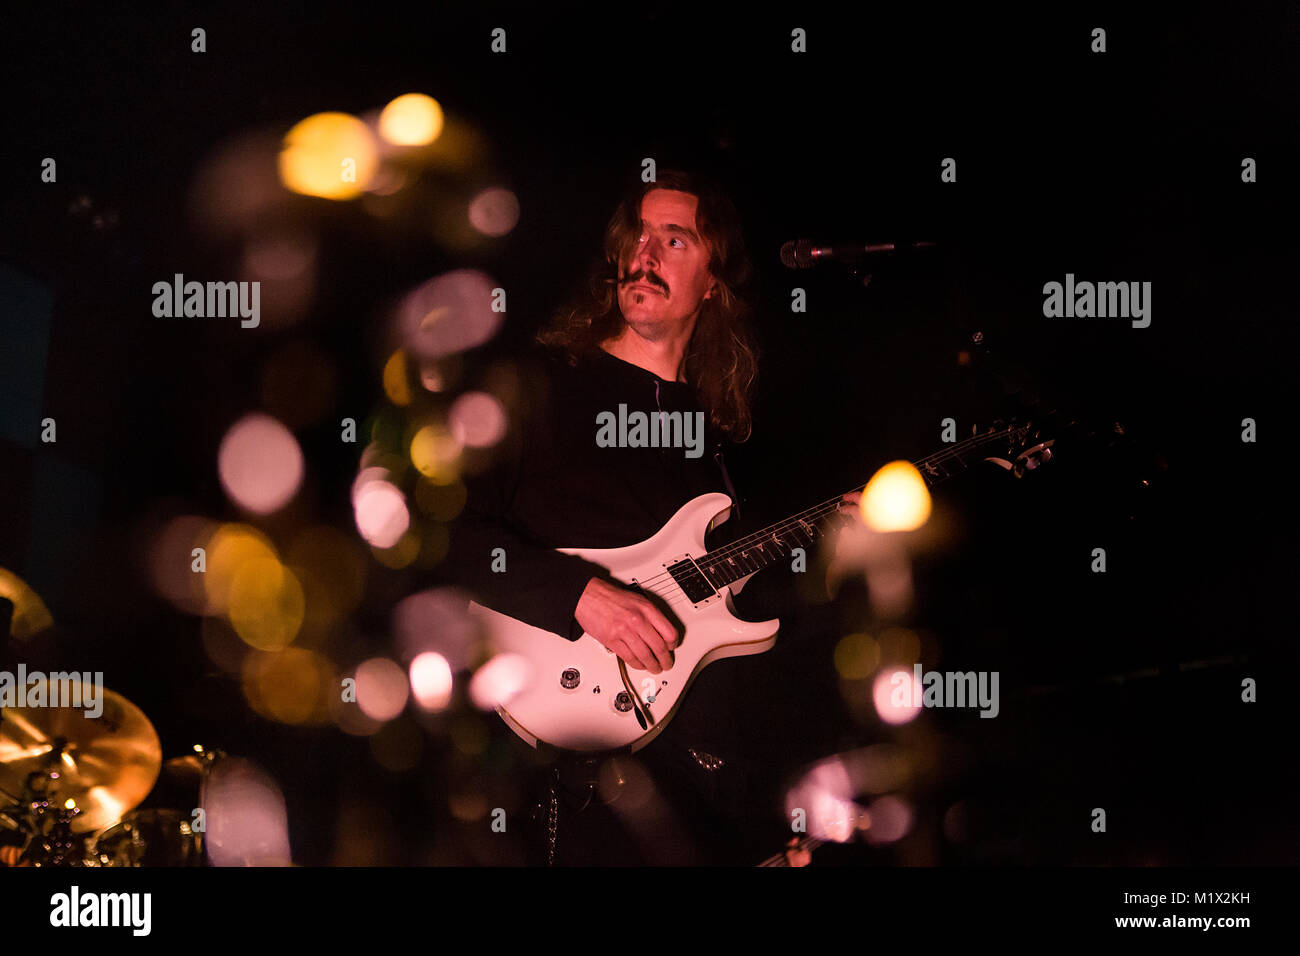 The progressive Swedish death metal band Opeth performs a live concert at USF Verftet in Bergen. Here vocalist and guitarist Mikael Åkerfeldt is pictured live on stage. Norway, 09/10 2015. Stock Photo